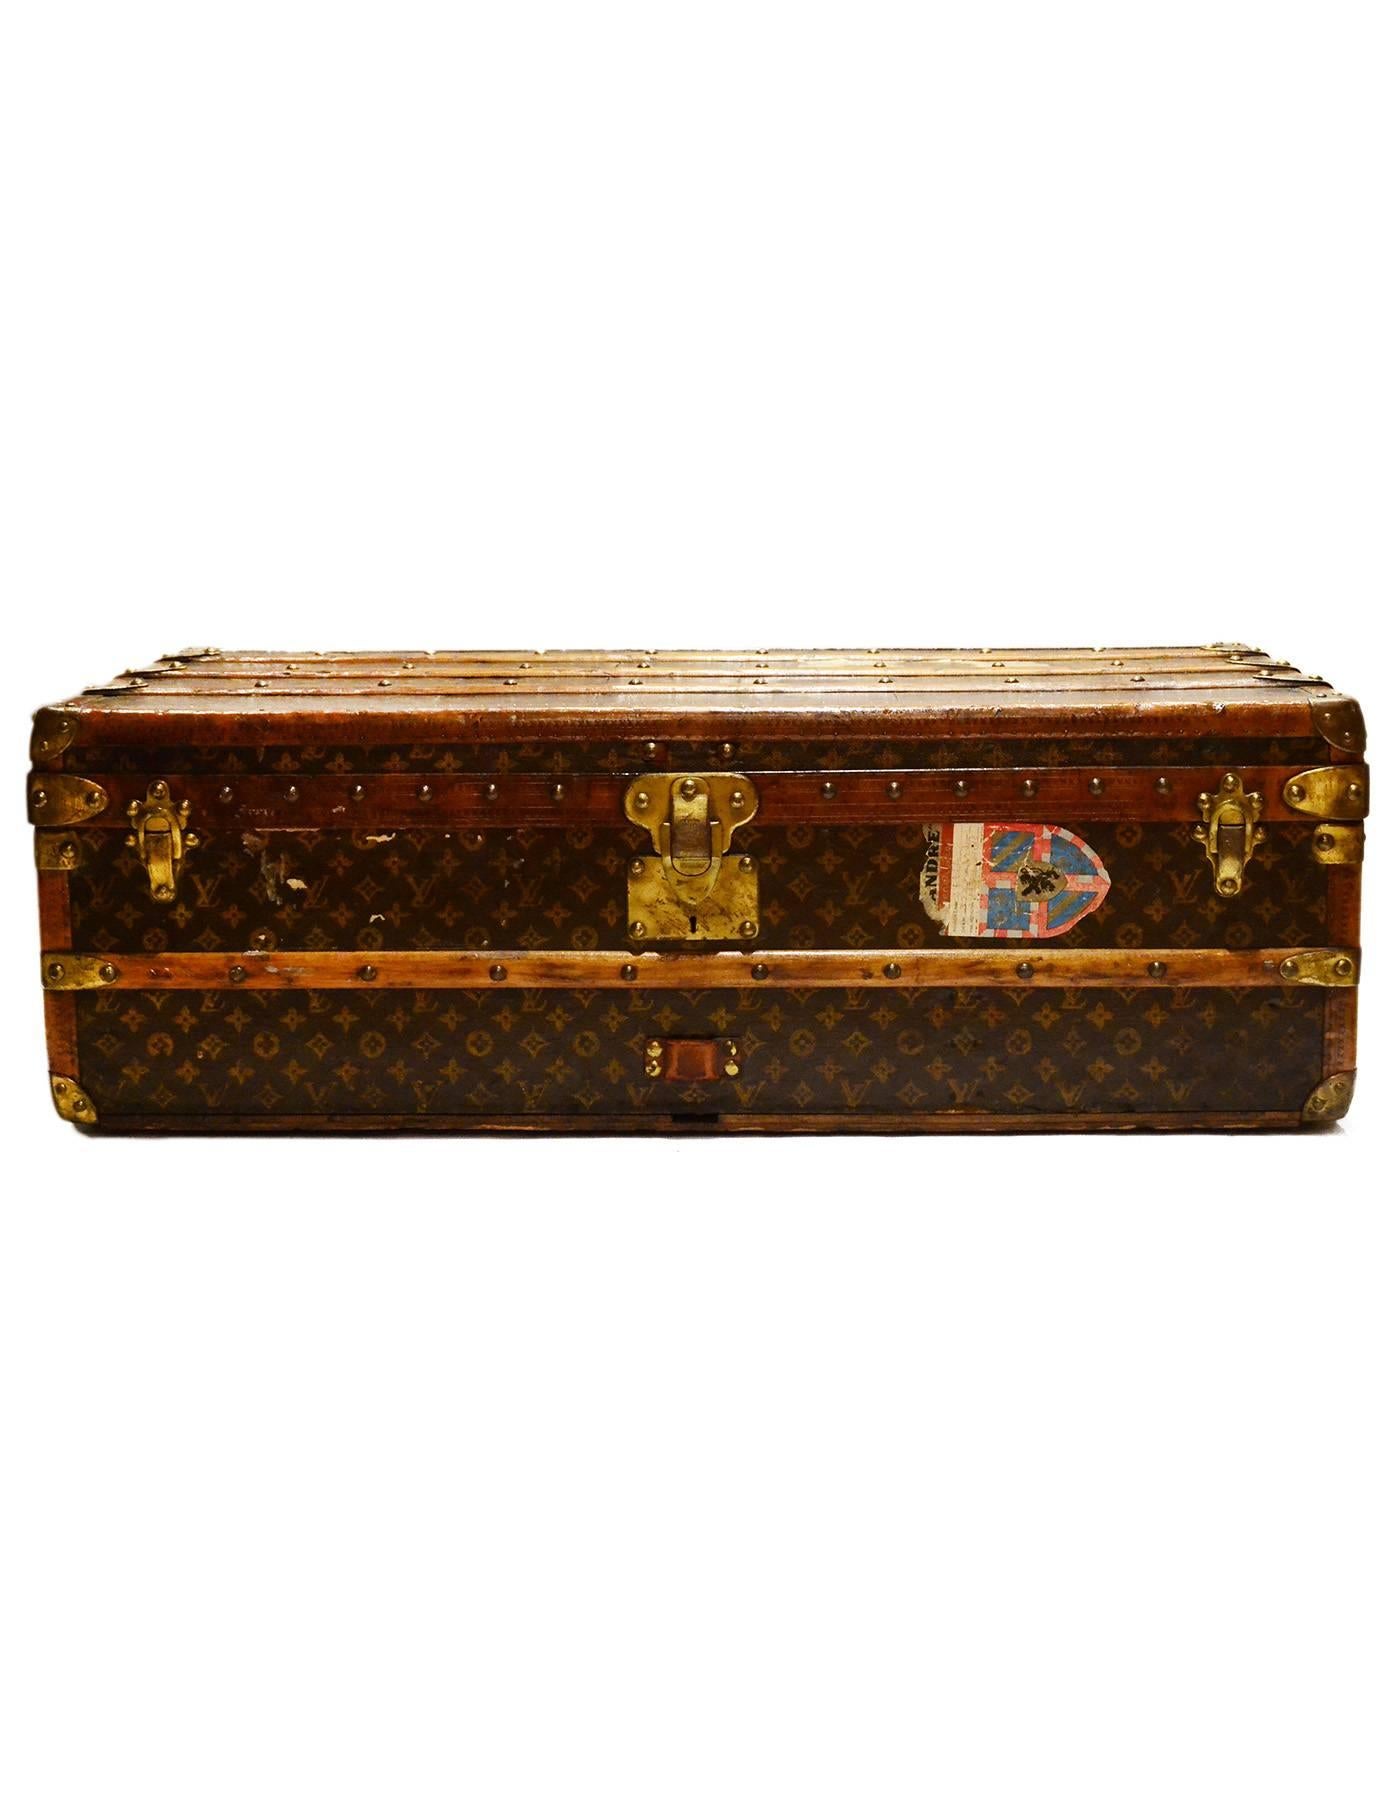 Louis Vuitton Vintage Monogram Rolling Cabin Trunk w/Insert c 1920's
Features vintage travel stickers throughout exterior as well as A.S.L. painted on side of trunk in yellow
Color: Brown, tan, and brass
Hardware: Brass
Materials: Coated canvas,